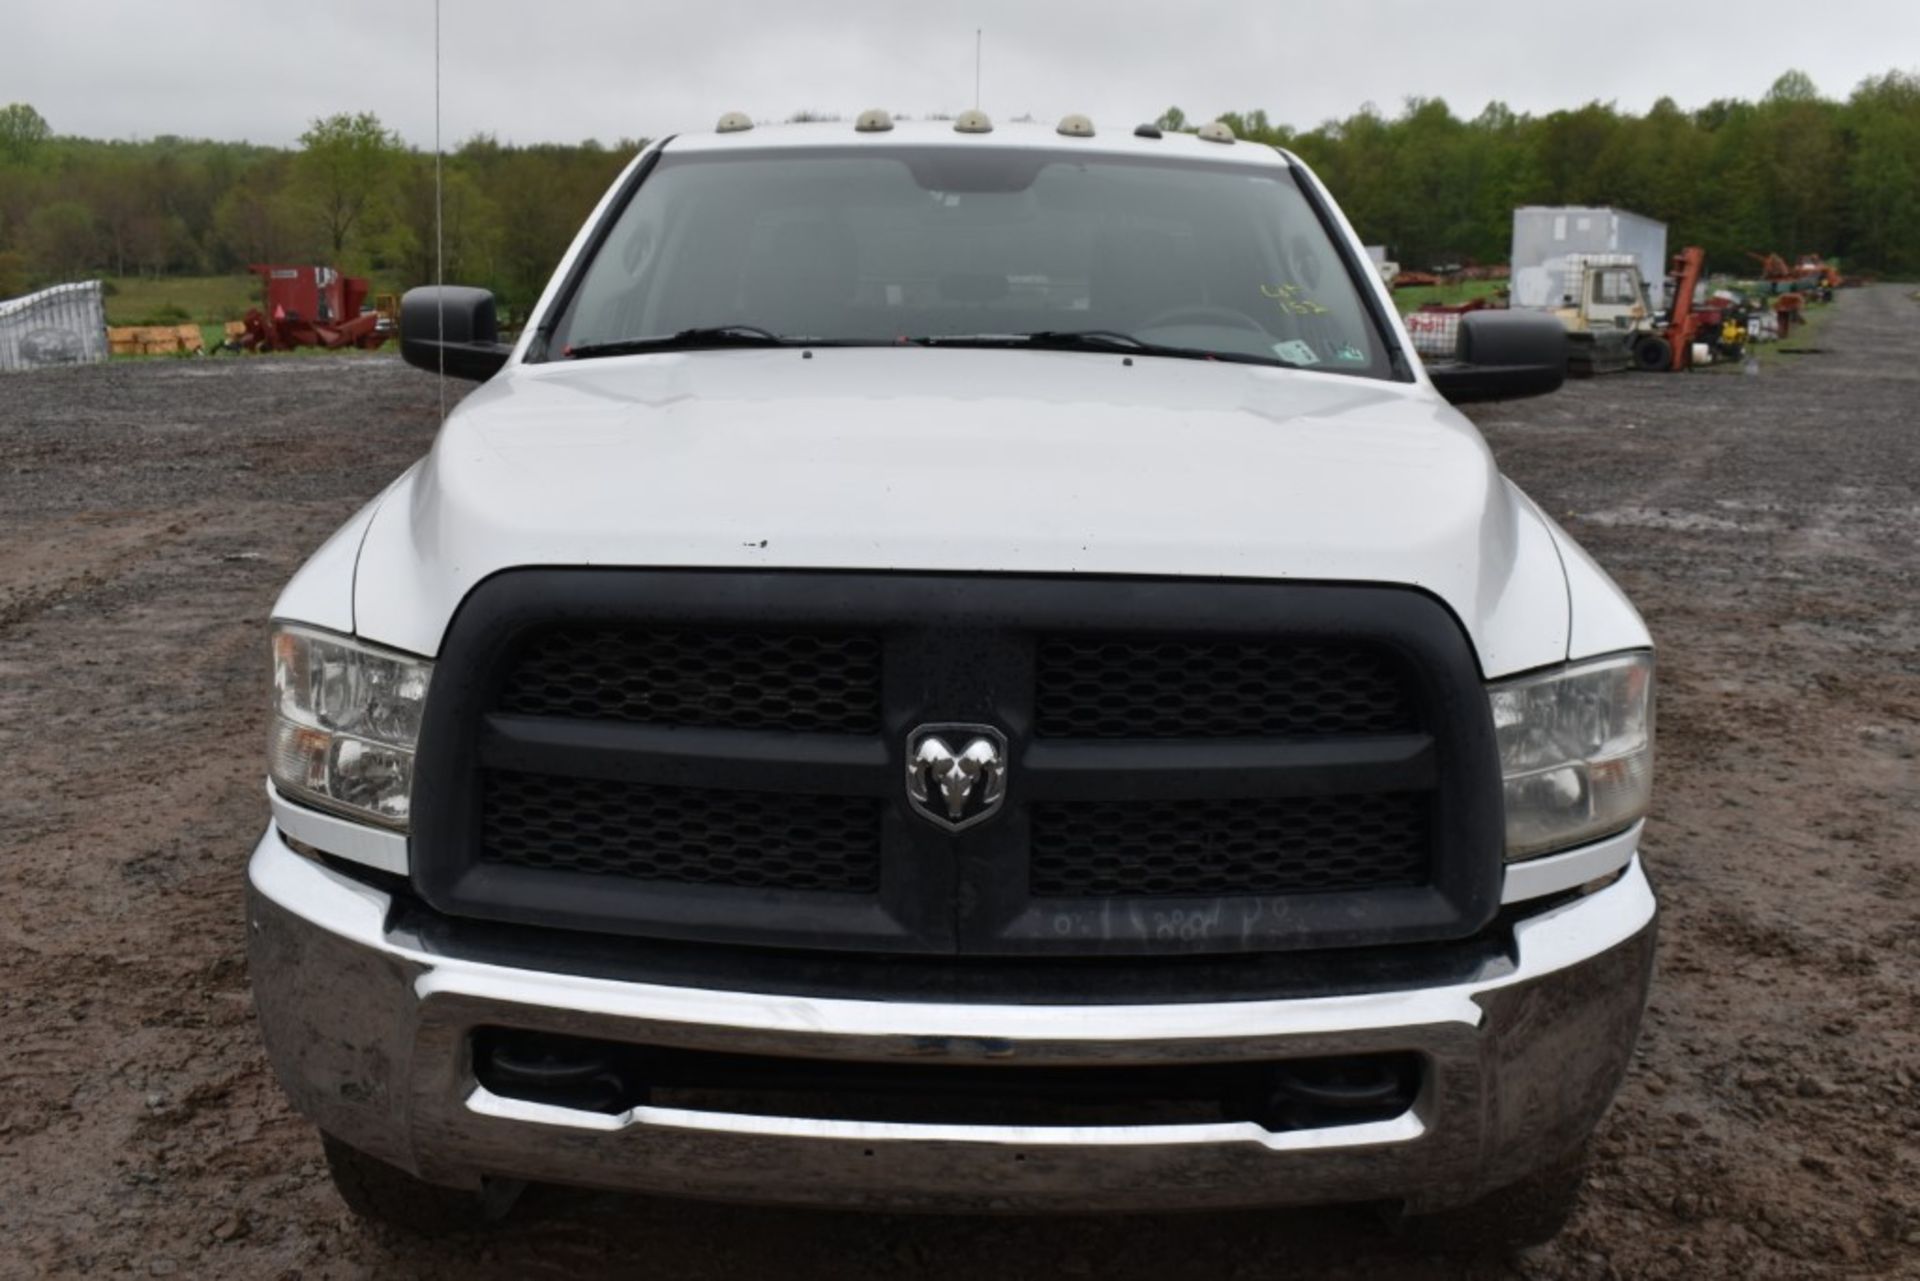 2015 Dodge Ram 2500 Truck With Title, 181238 Miles, Runs and Drives, Hemi 5.7 Gas Engine, Automatic, - Image 2 of 23